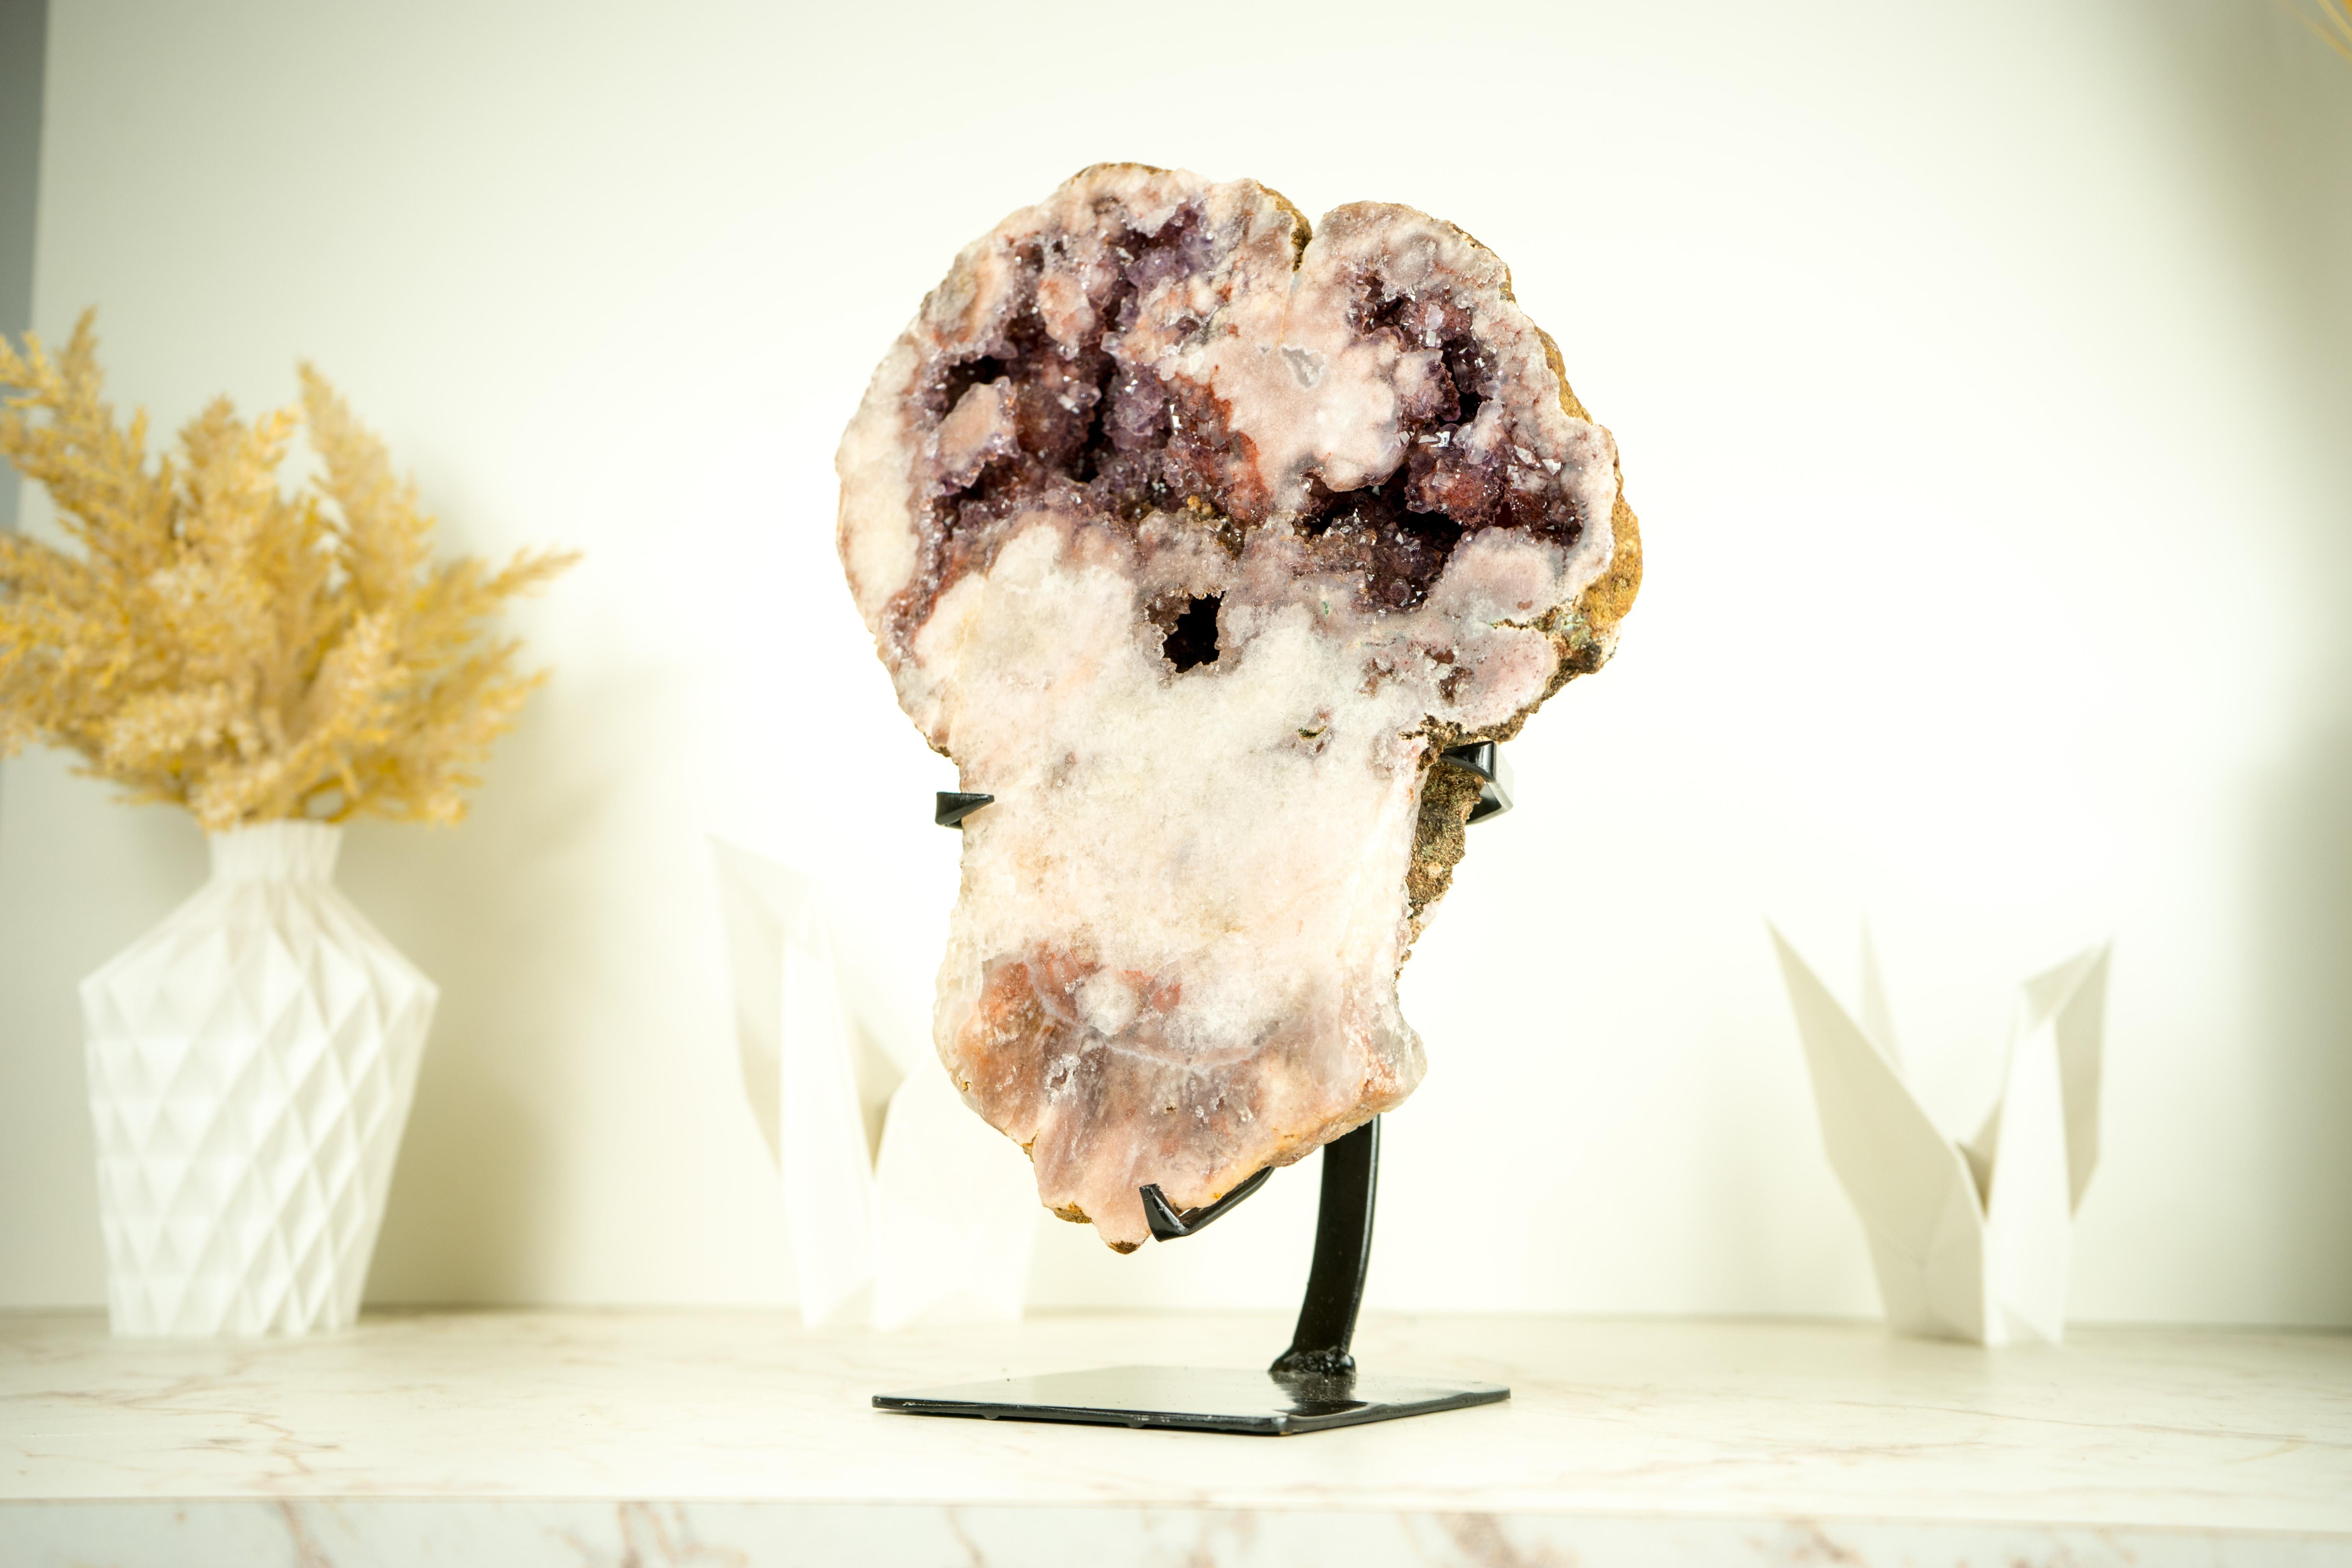 Brazilian Rare All-Natural Pink Amethyst Geode with Sparkly Red Amethyst Druzy  For Sale